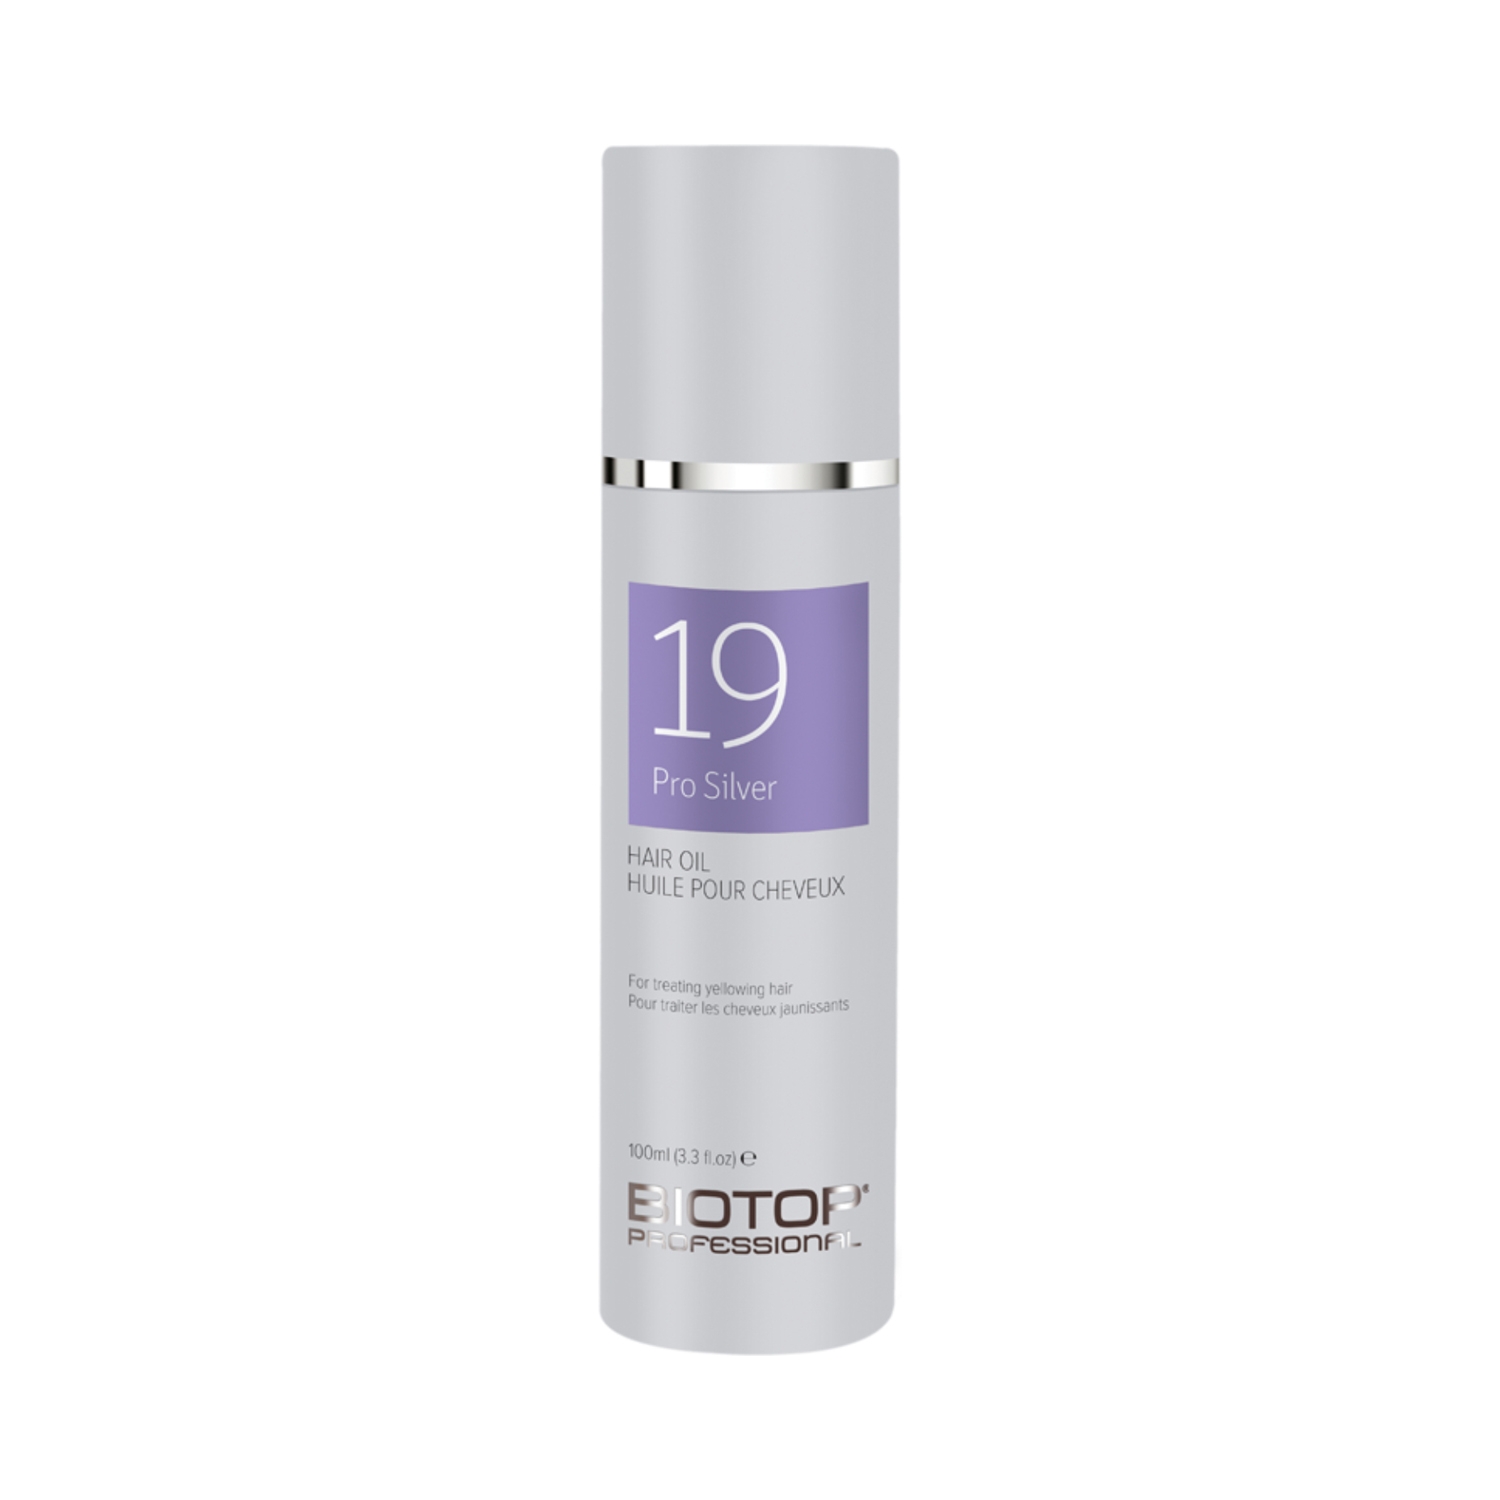 Biotop Professional 19 Pro Silver Hair Oil (100ml)